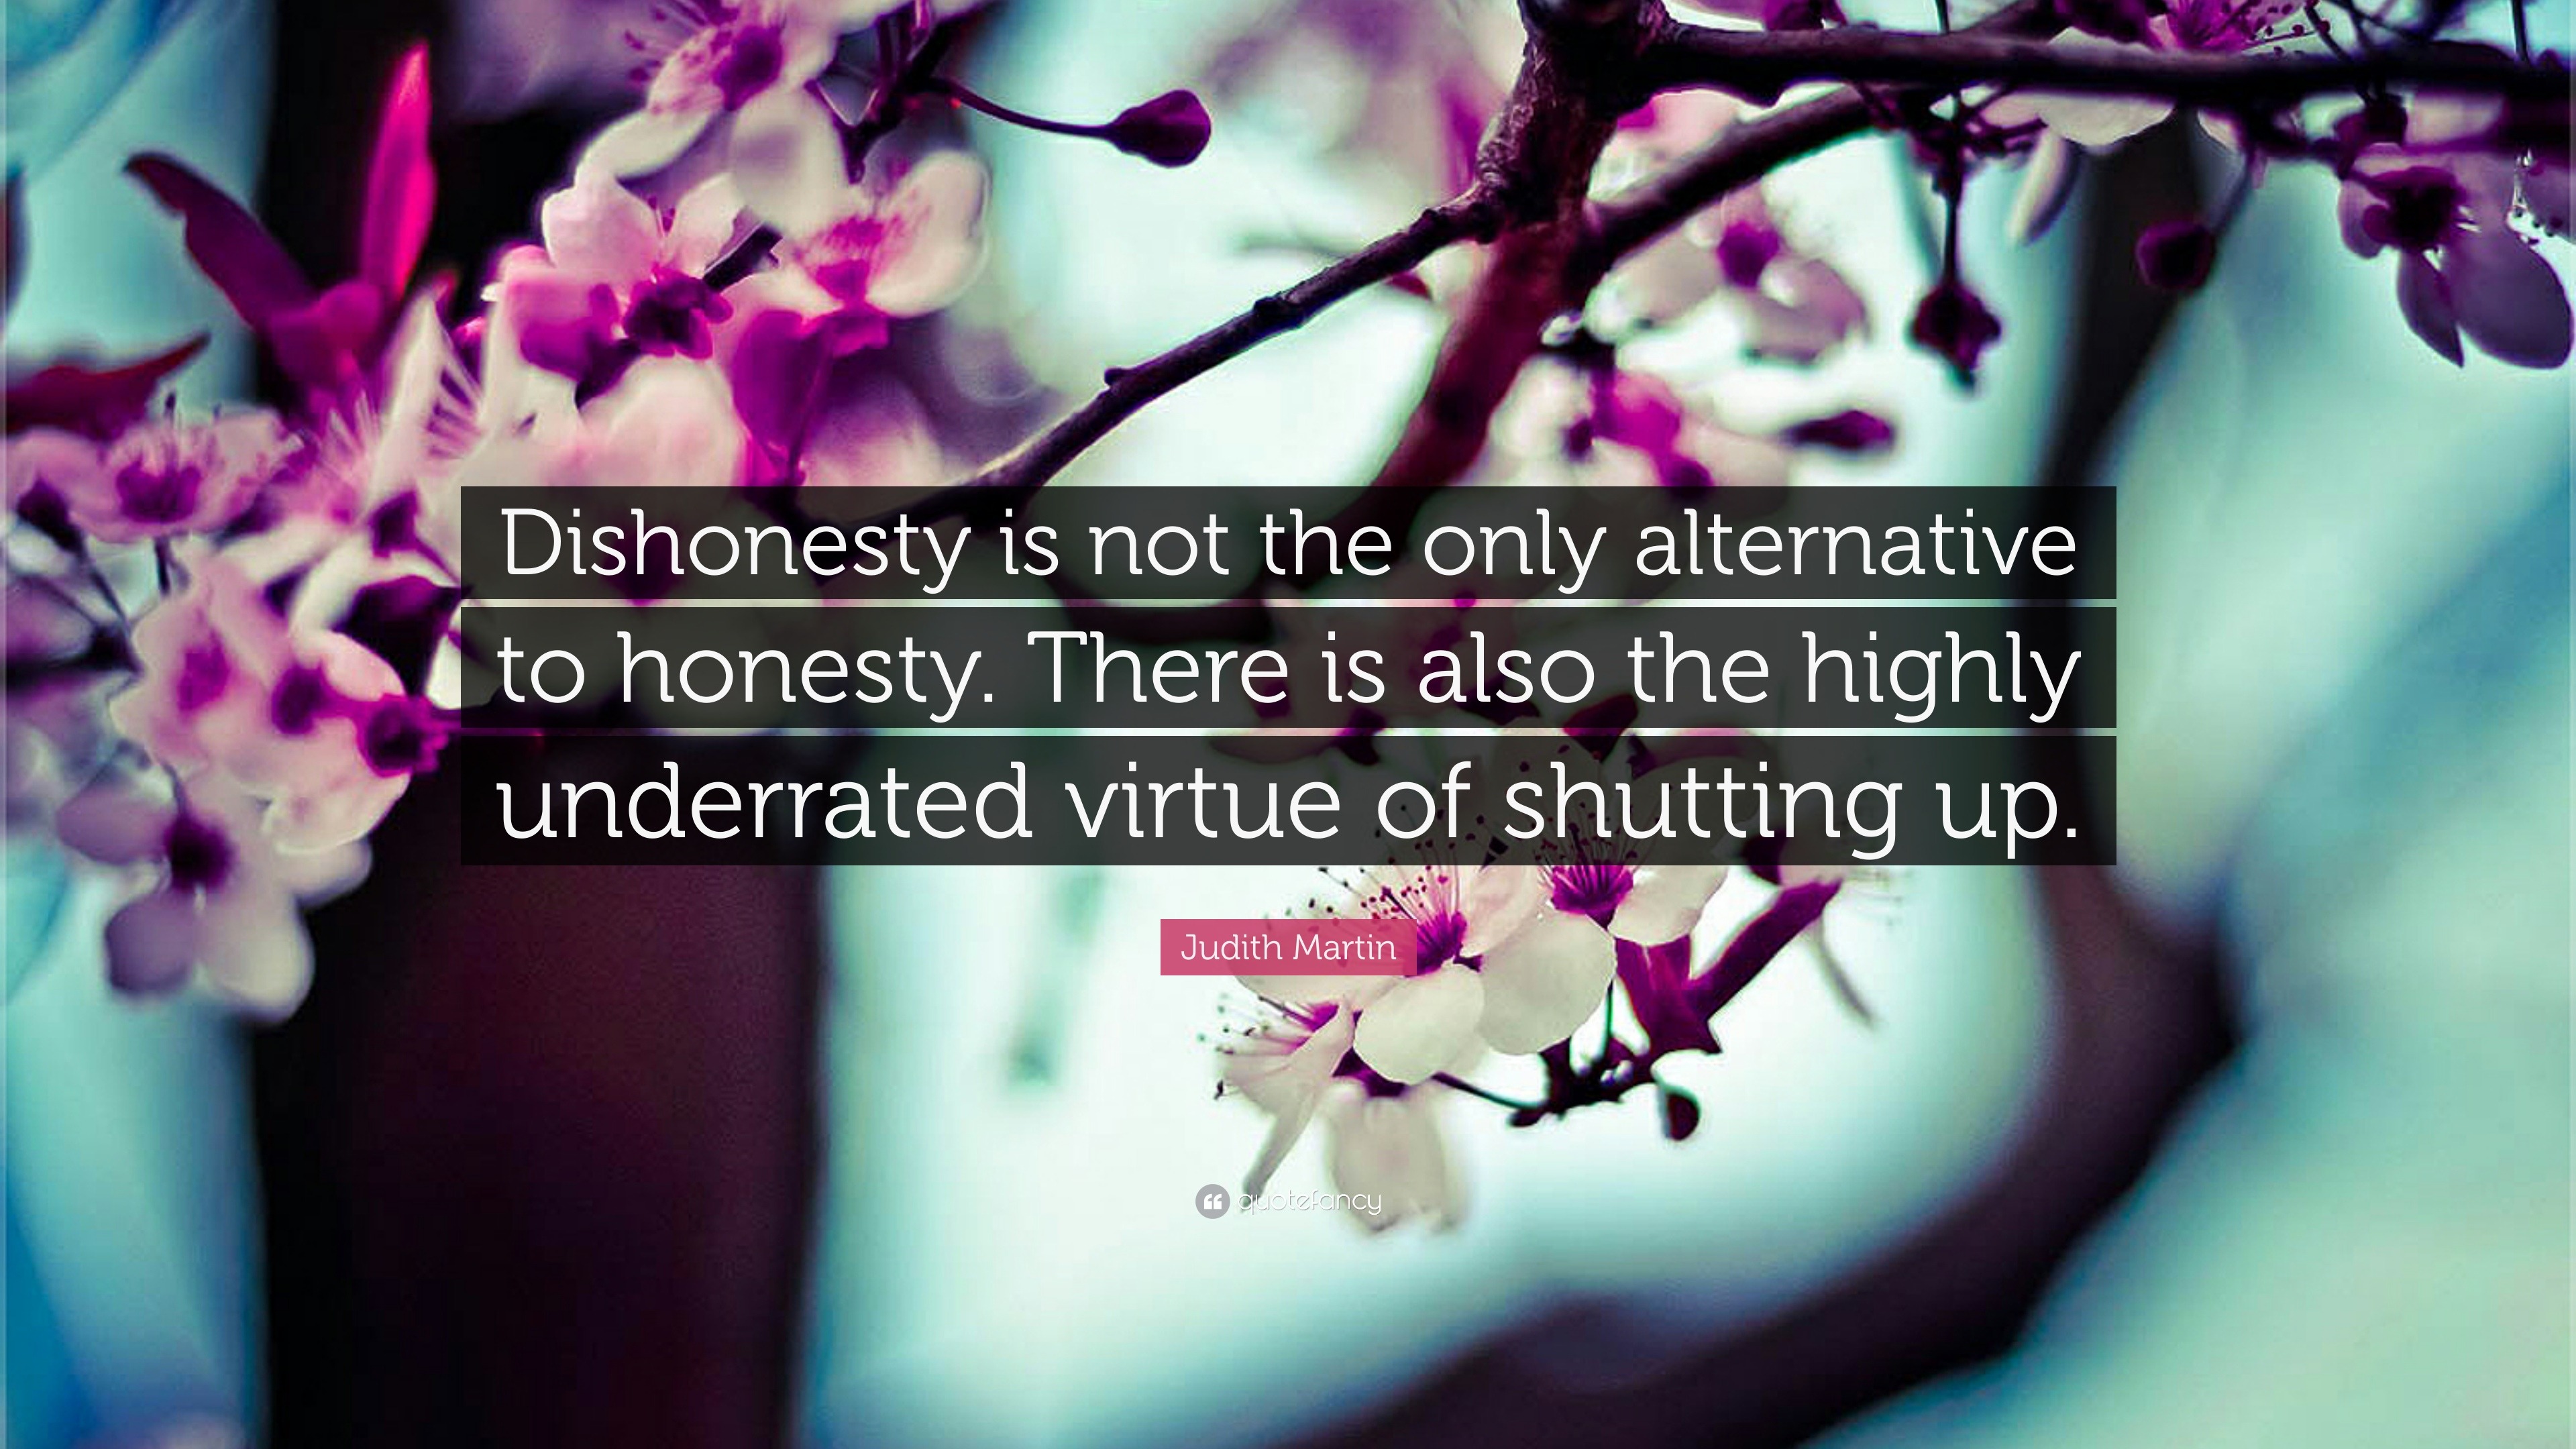 Dishonesty quotes images